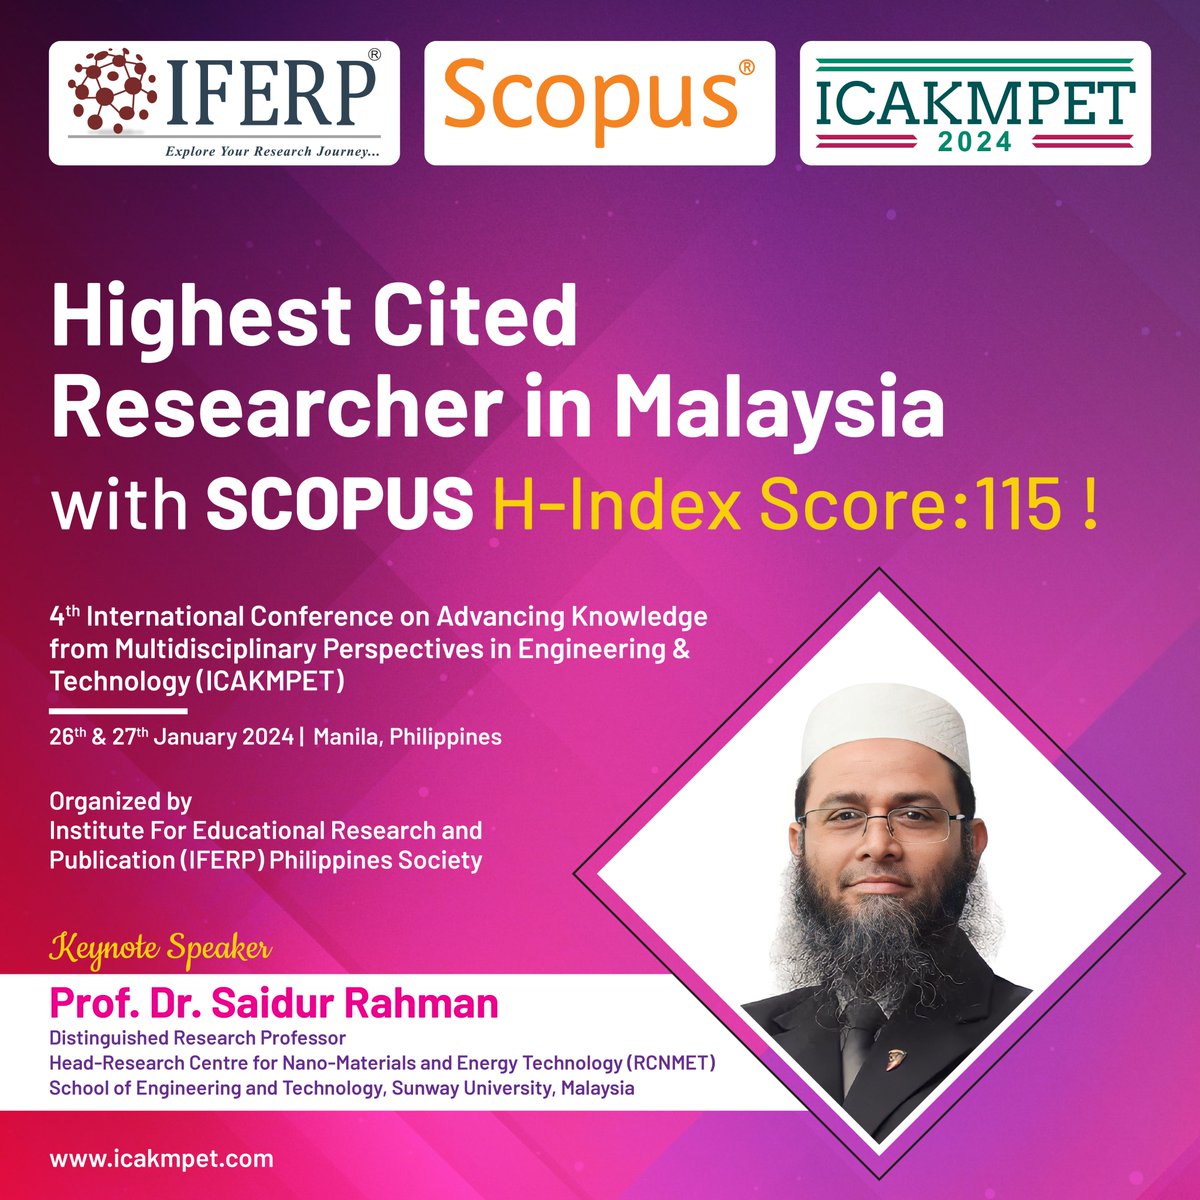 #IFERP has been honored to welcome Prof.Dr.Saidur Rahman, Distinguished Research Head & Professor at Research Centre for Nano Materials & #EnergyTechnology School of Engineering and #Technology Sunway University in #Malaysia as a #keynotespeaker at the #4thICAKMPET2024